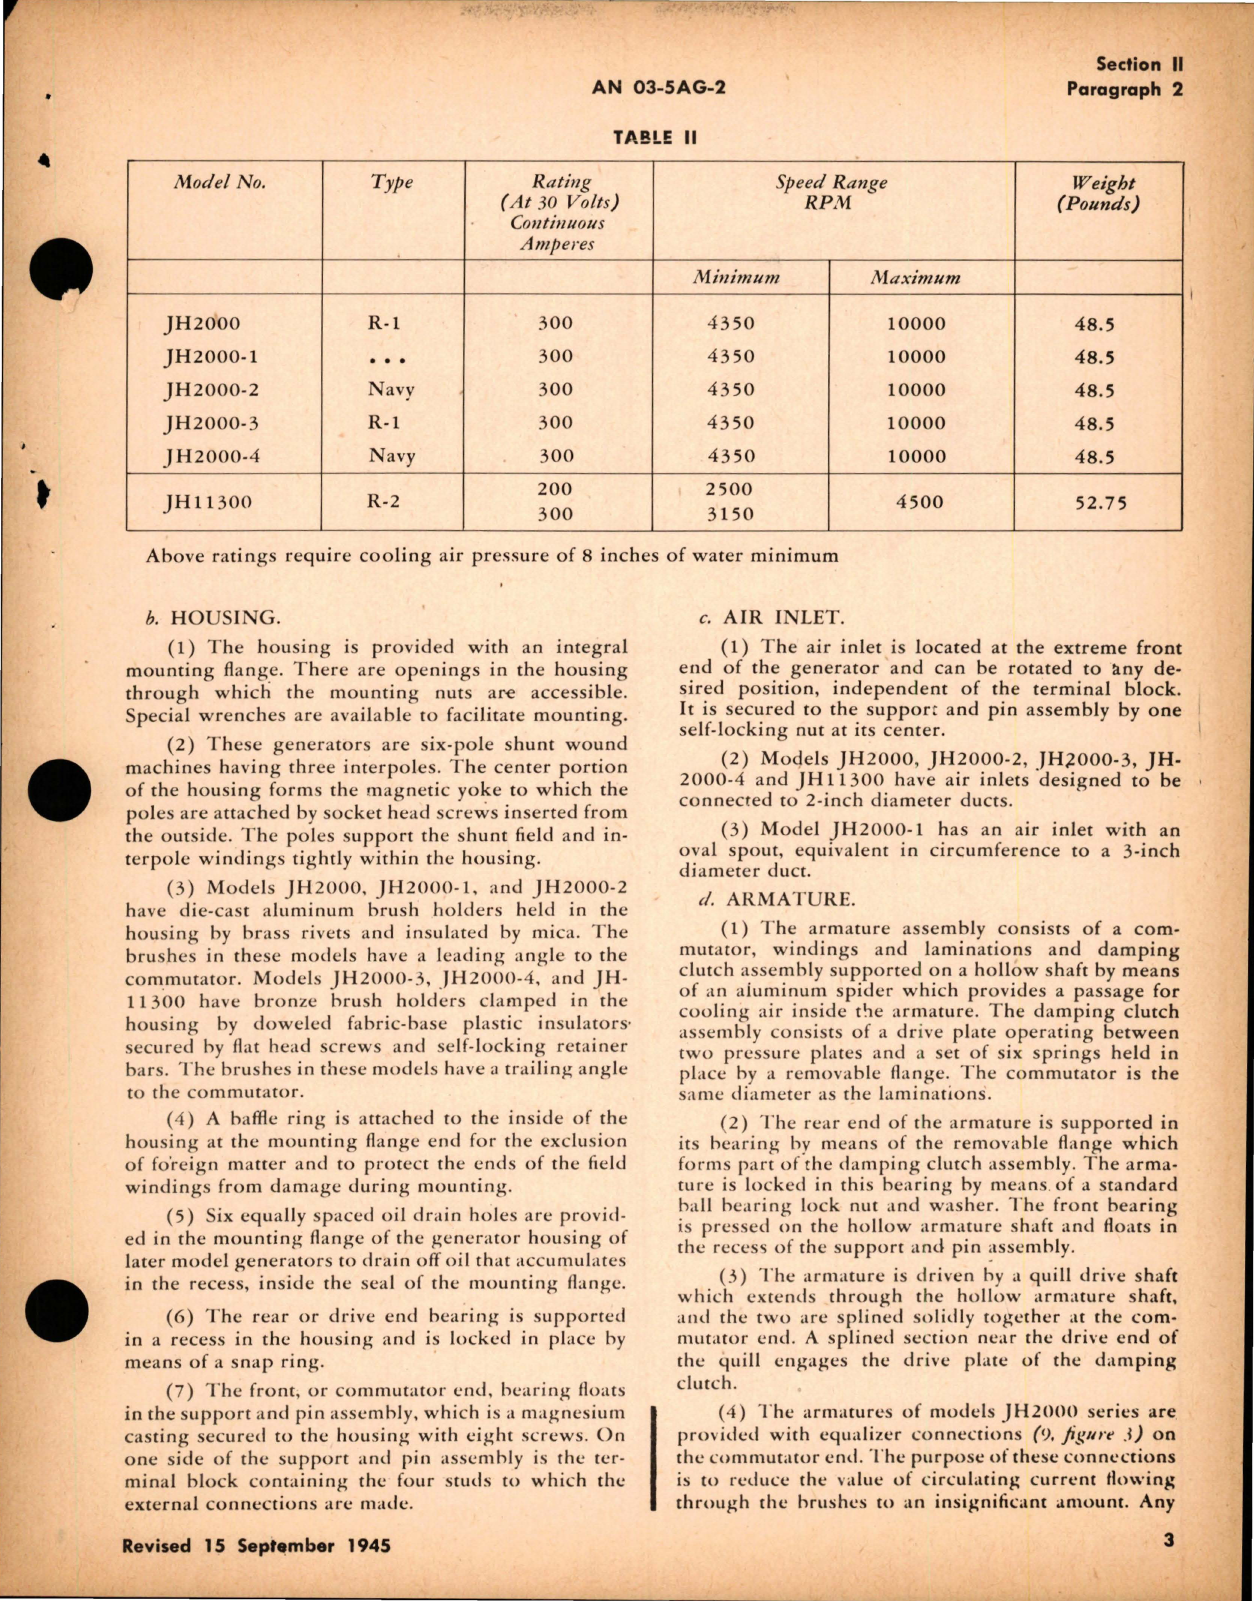 Sample page 7 from AirCorps Library document: Operation, Service and Overhaul Instructions with Parts Catalog for Generators - Types R-1 and R-2